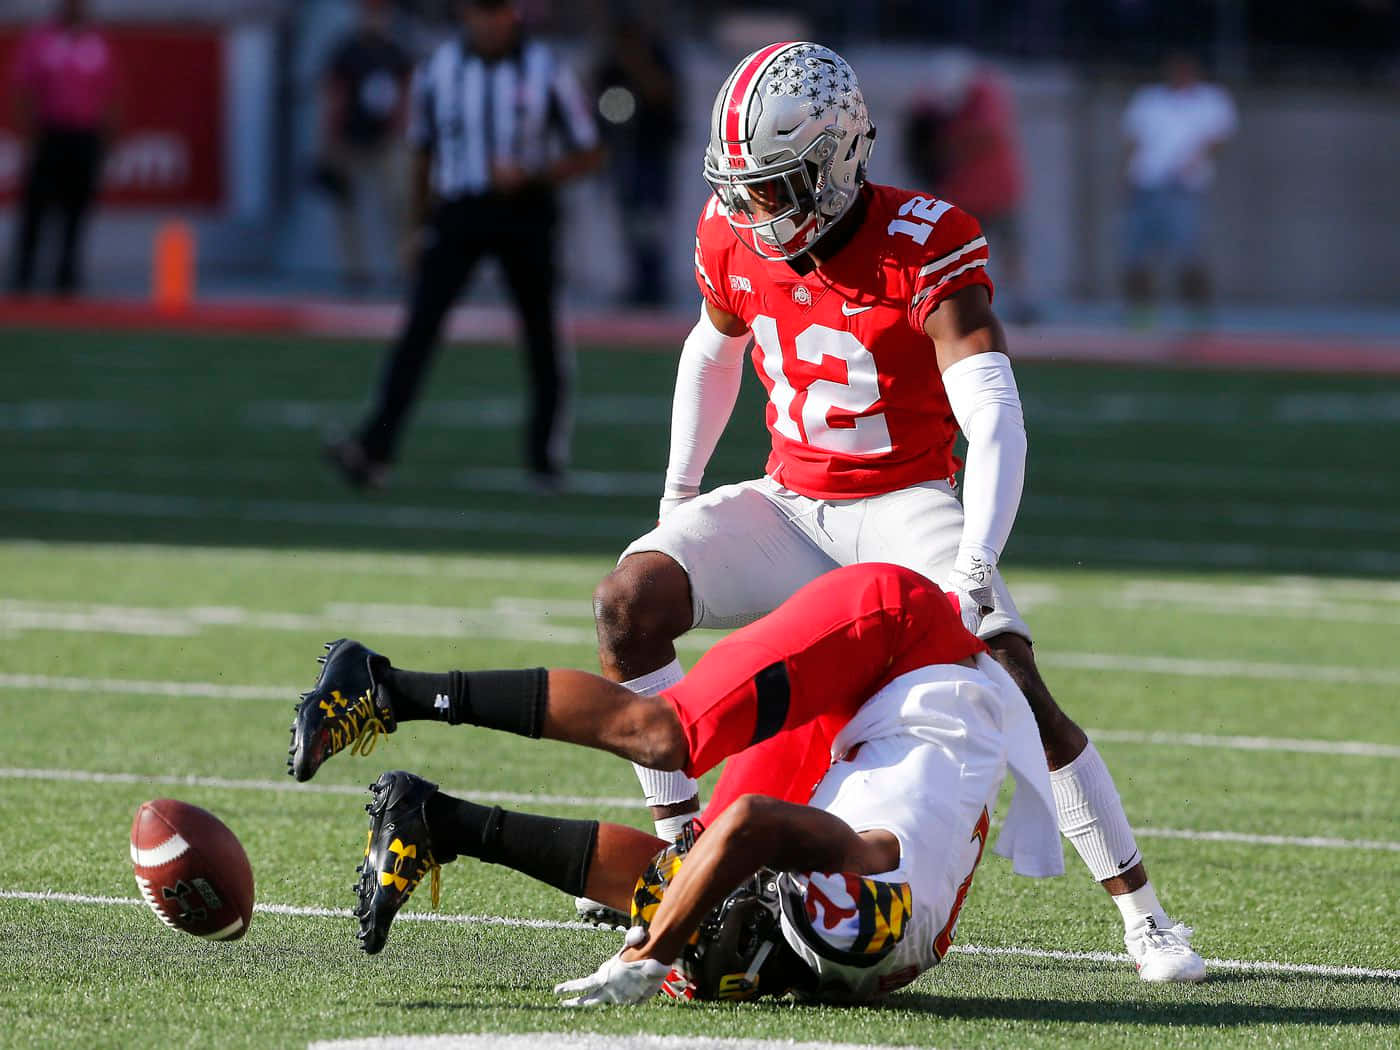 Denzel Ward in action during Ohio State vs Maryland Terrapins football game. Wallpaper